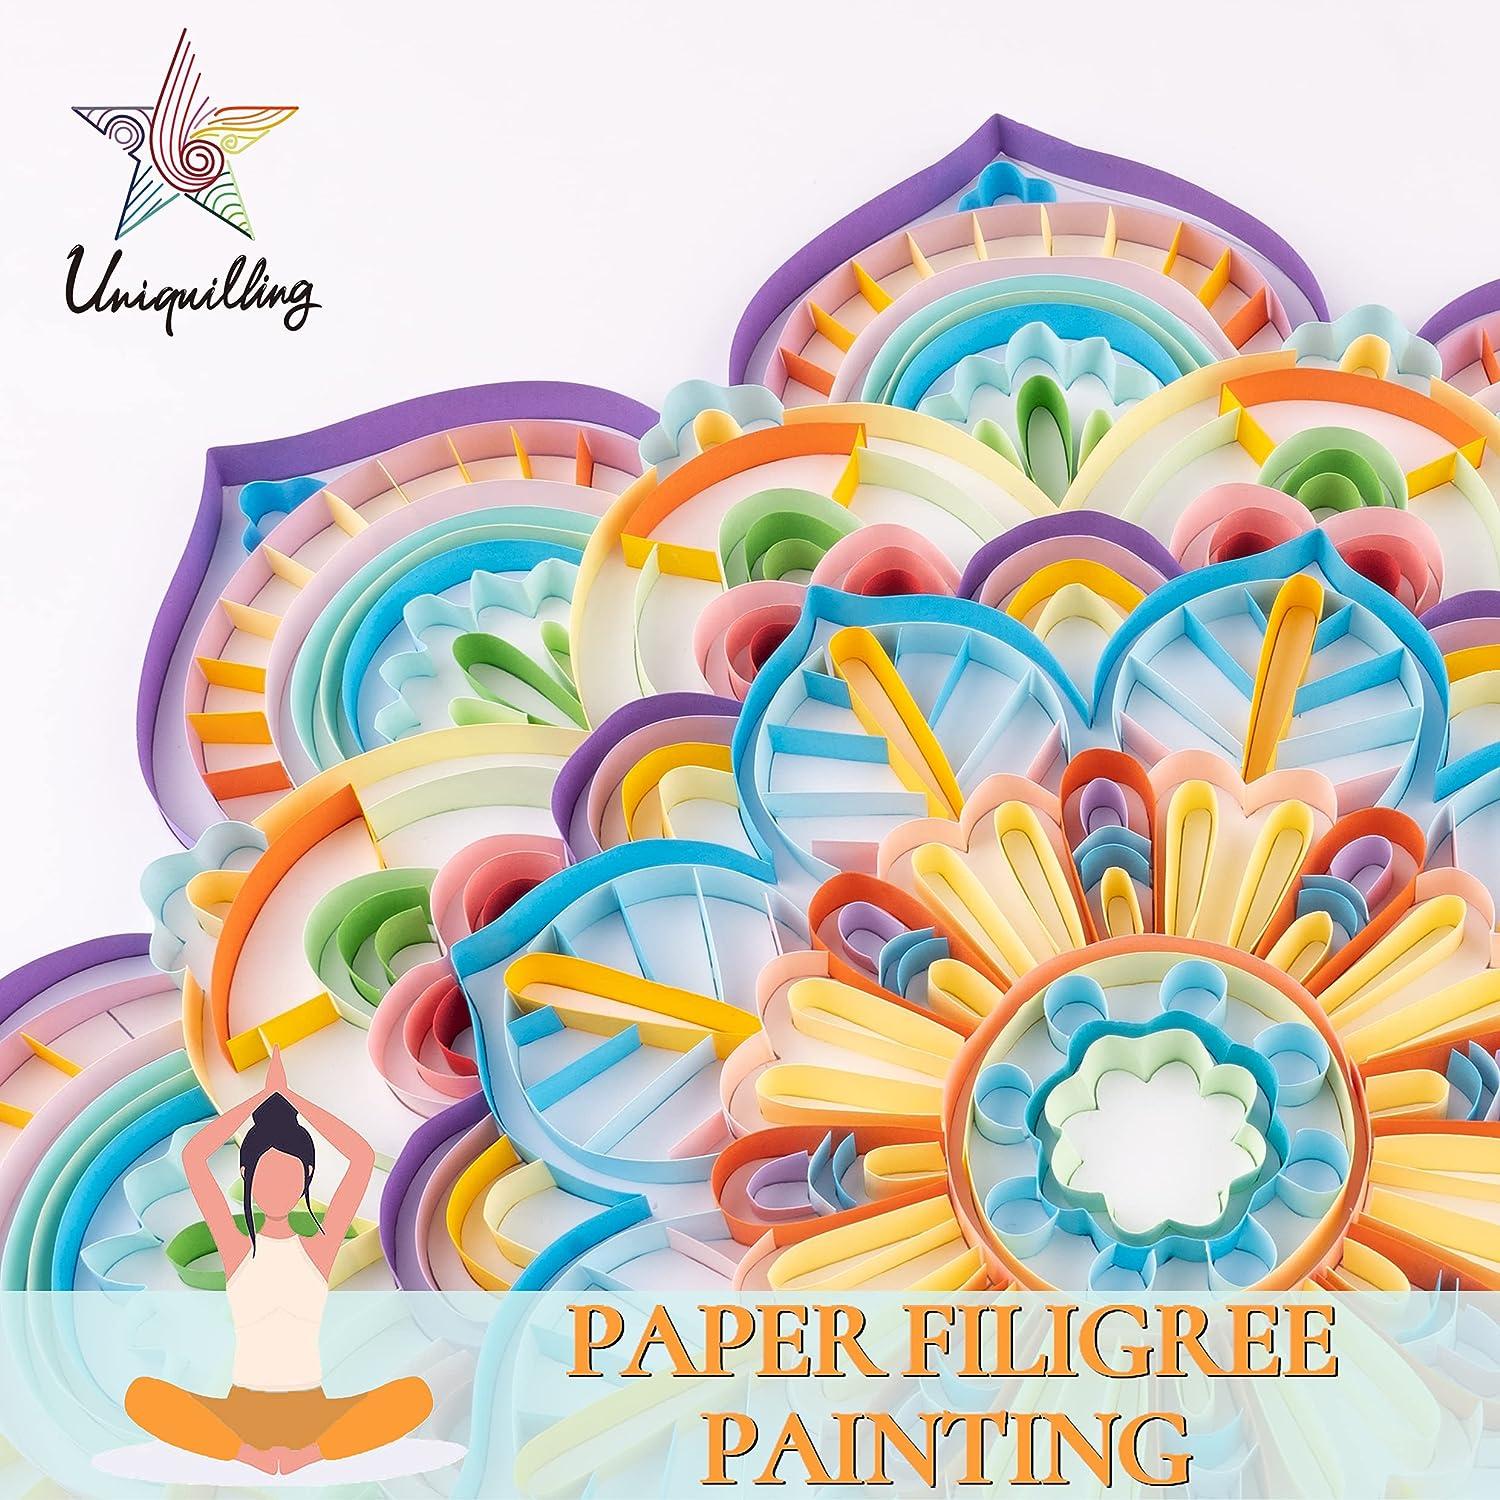 Uniquilling Quilling Kits Paper Quilling Kit for Adults Beginner, Paper  Filigree Painting Kits DIY Kits for Adults with Complete Quilling Tools